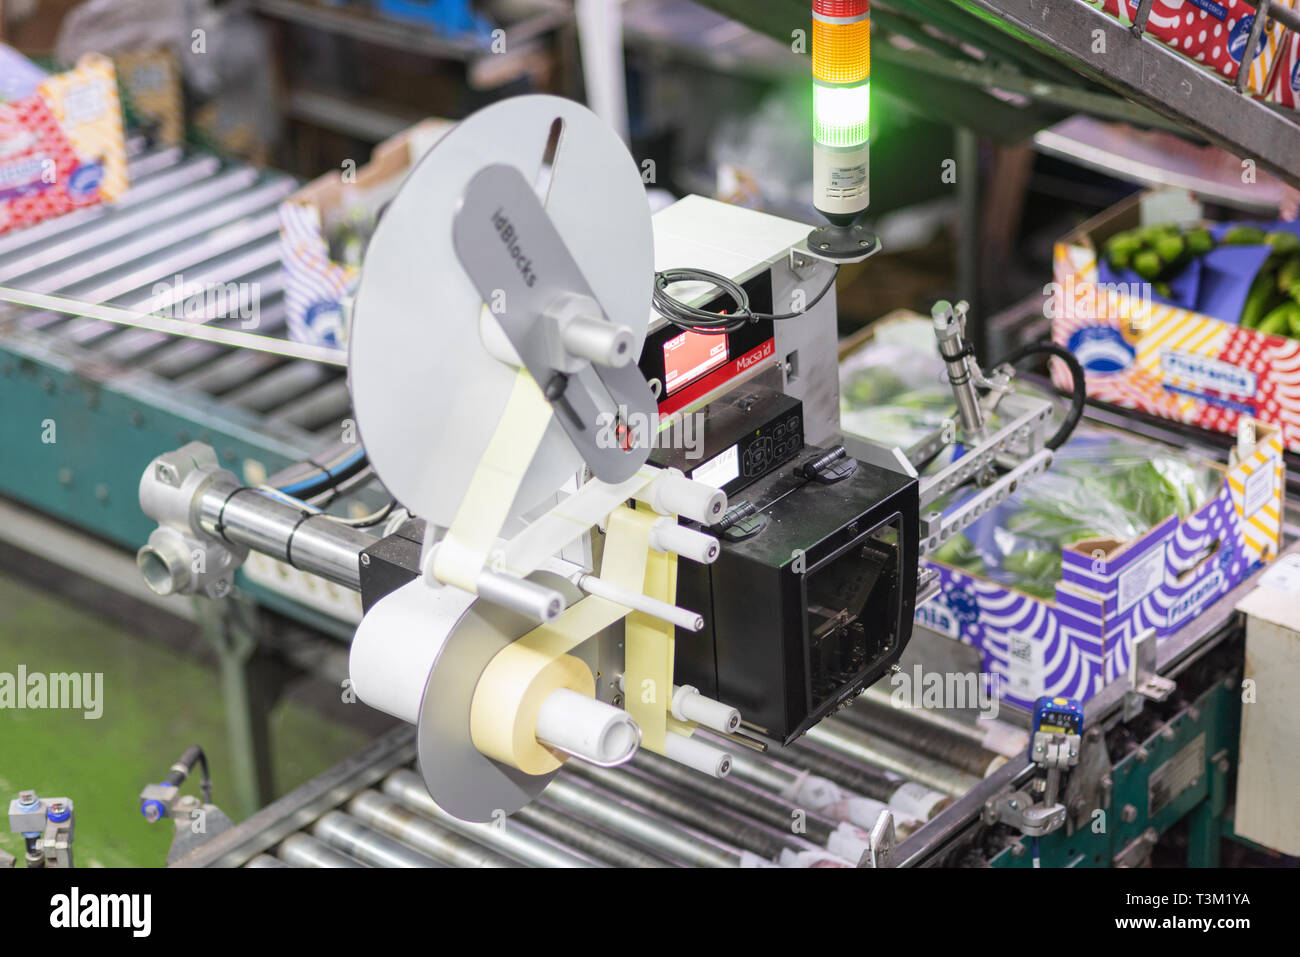 Tenerife, Spain - January 3, 2019: Automated labeling machine during operation in food packaging industry in Tenerife, Canary islands, Spain. Stock Photo